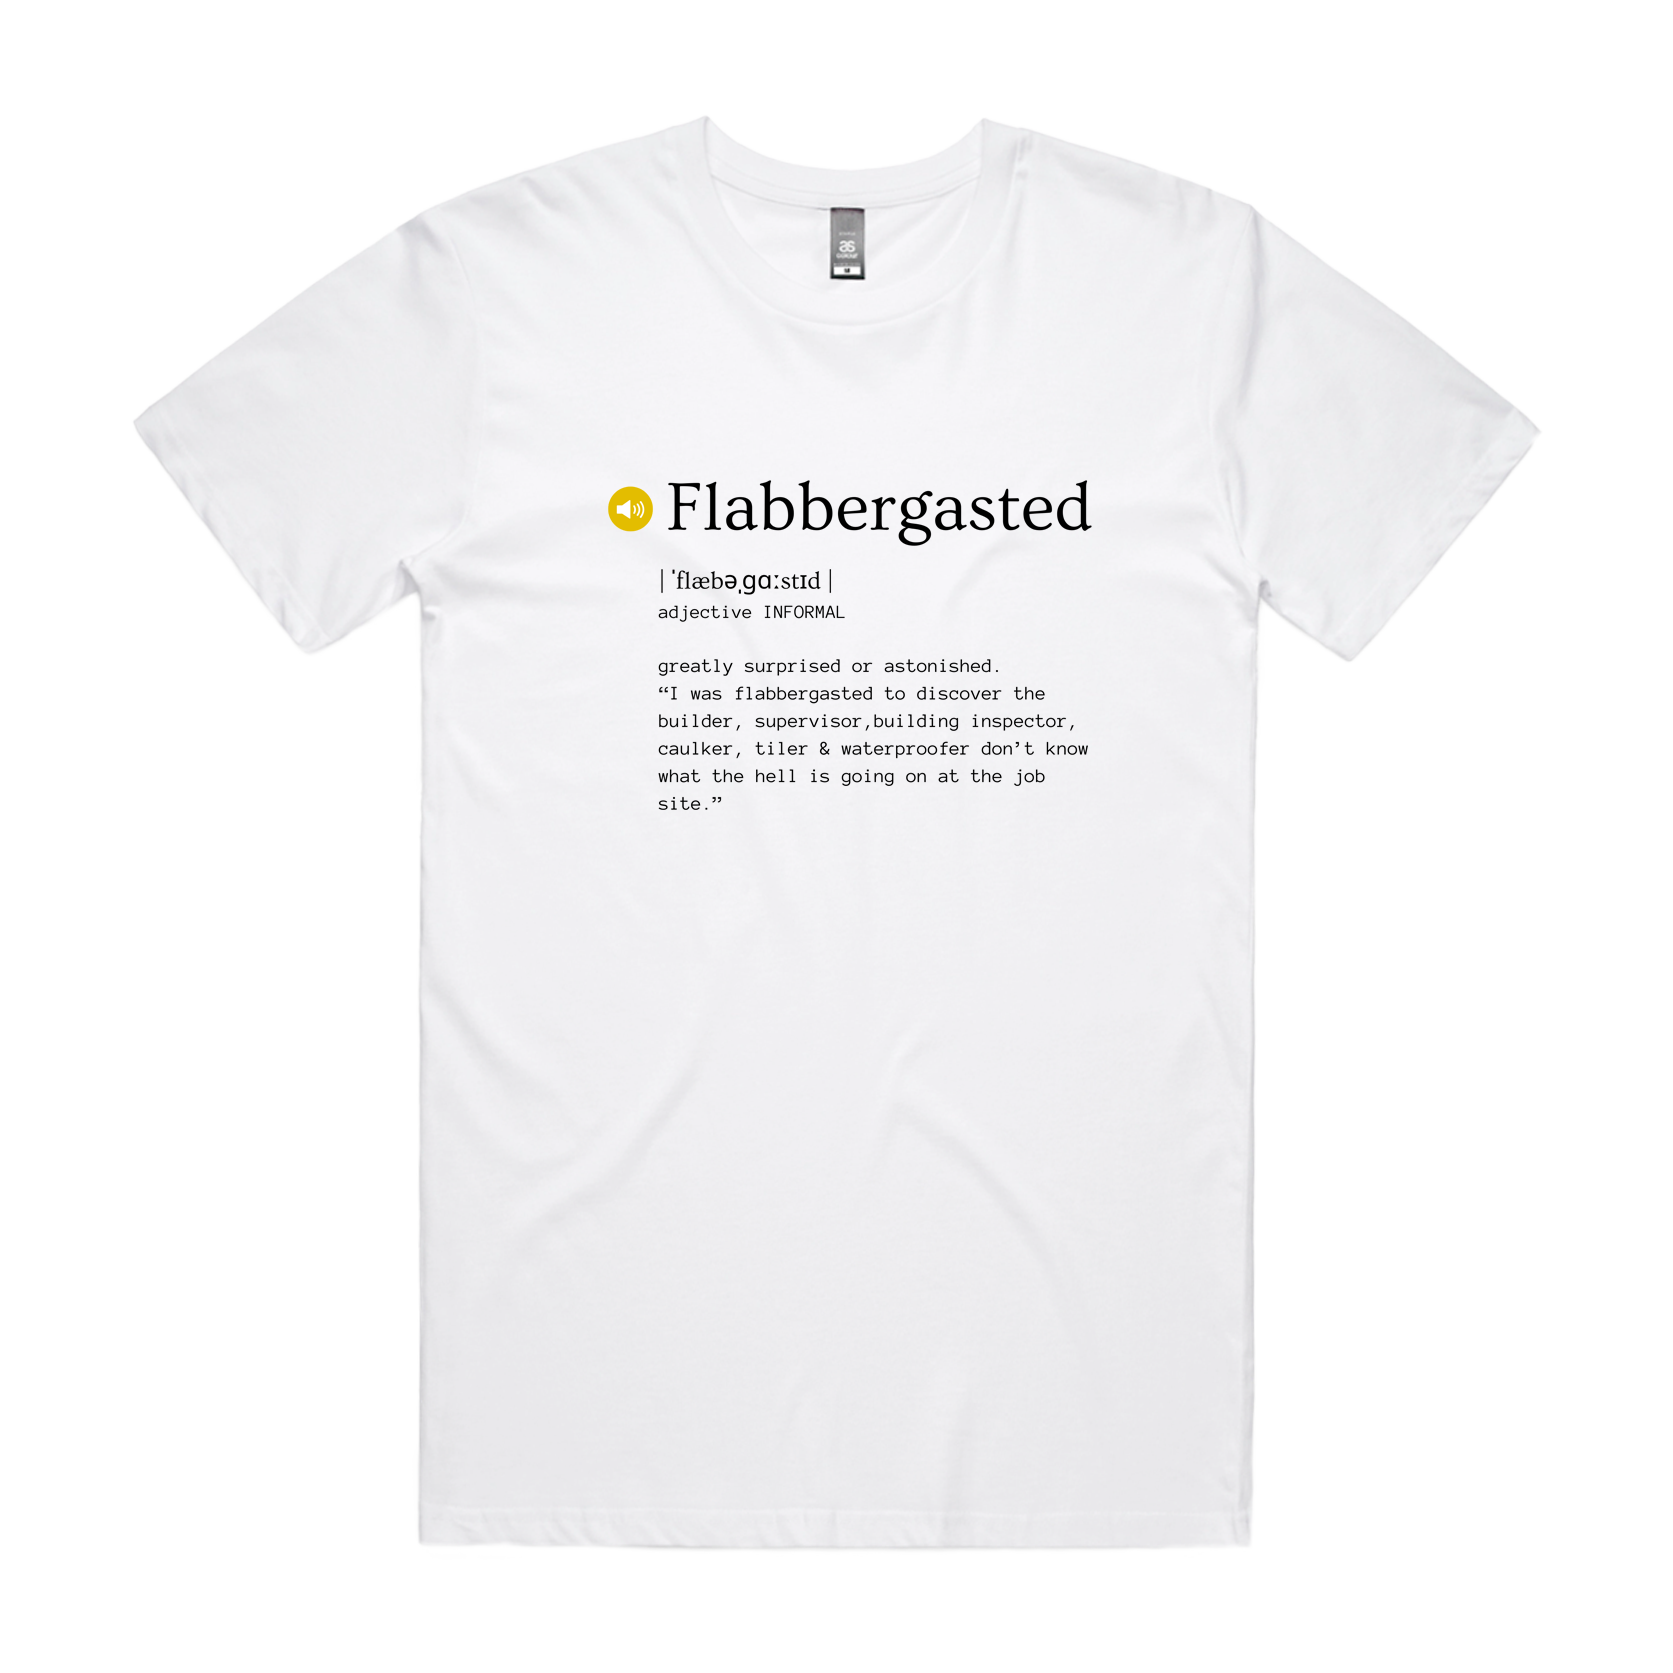 I am Simply Flabbergasted" T-Shirt